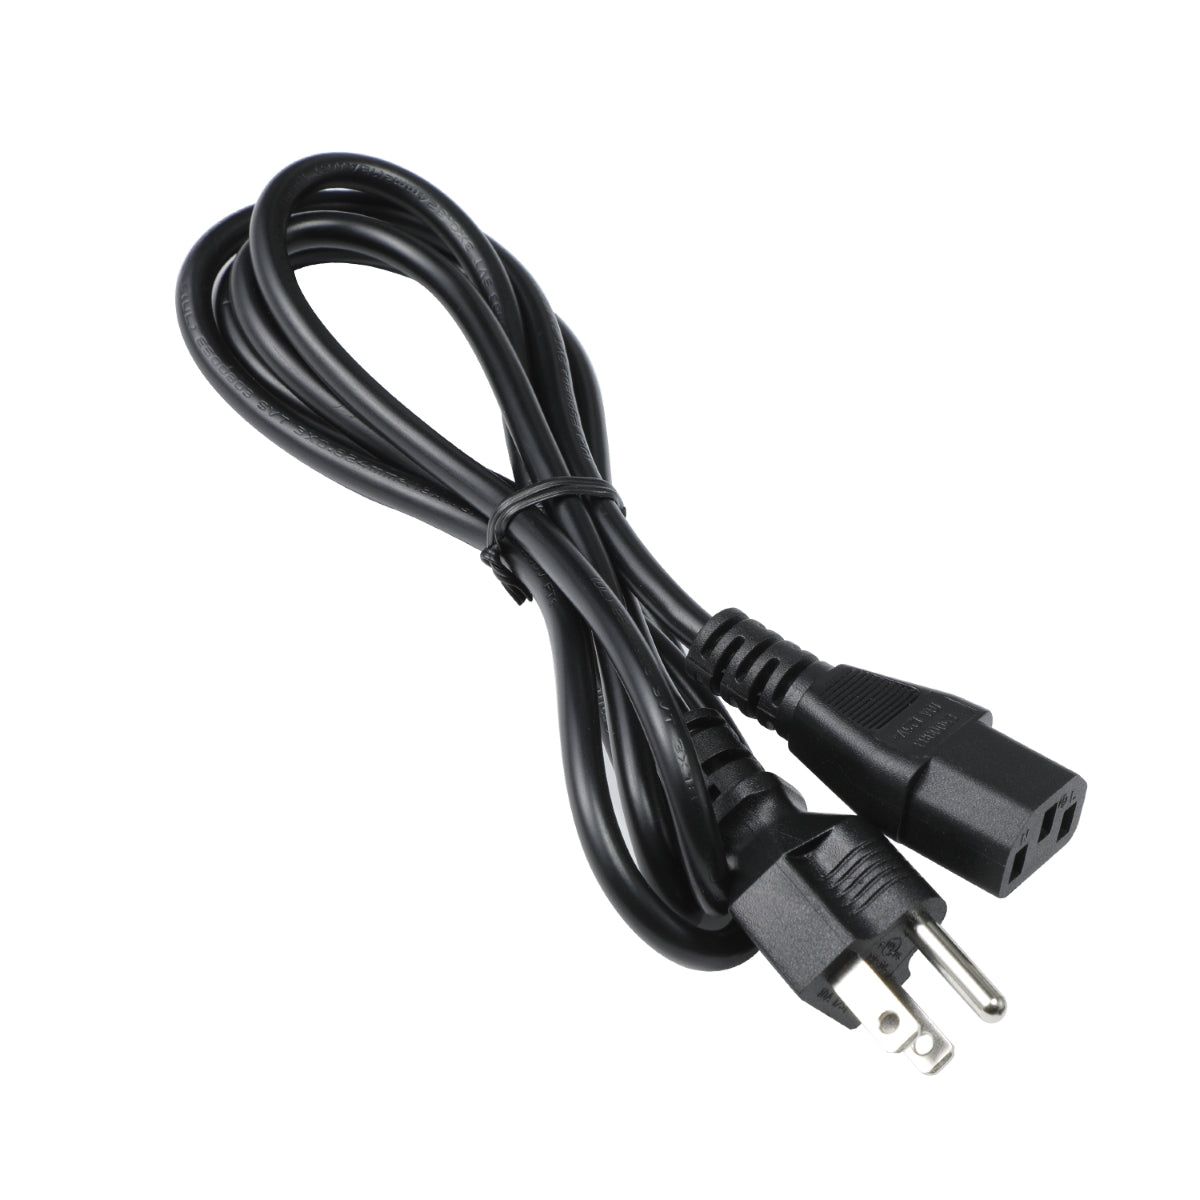 Power Cord for Samsung LS34A650UXNXGO Monitor TV.